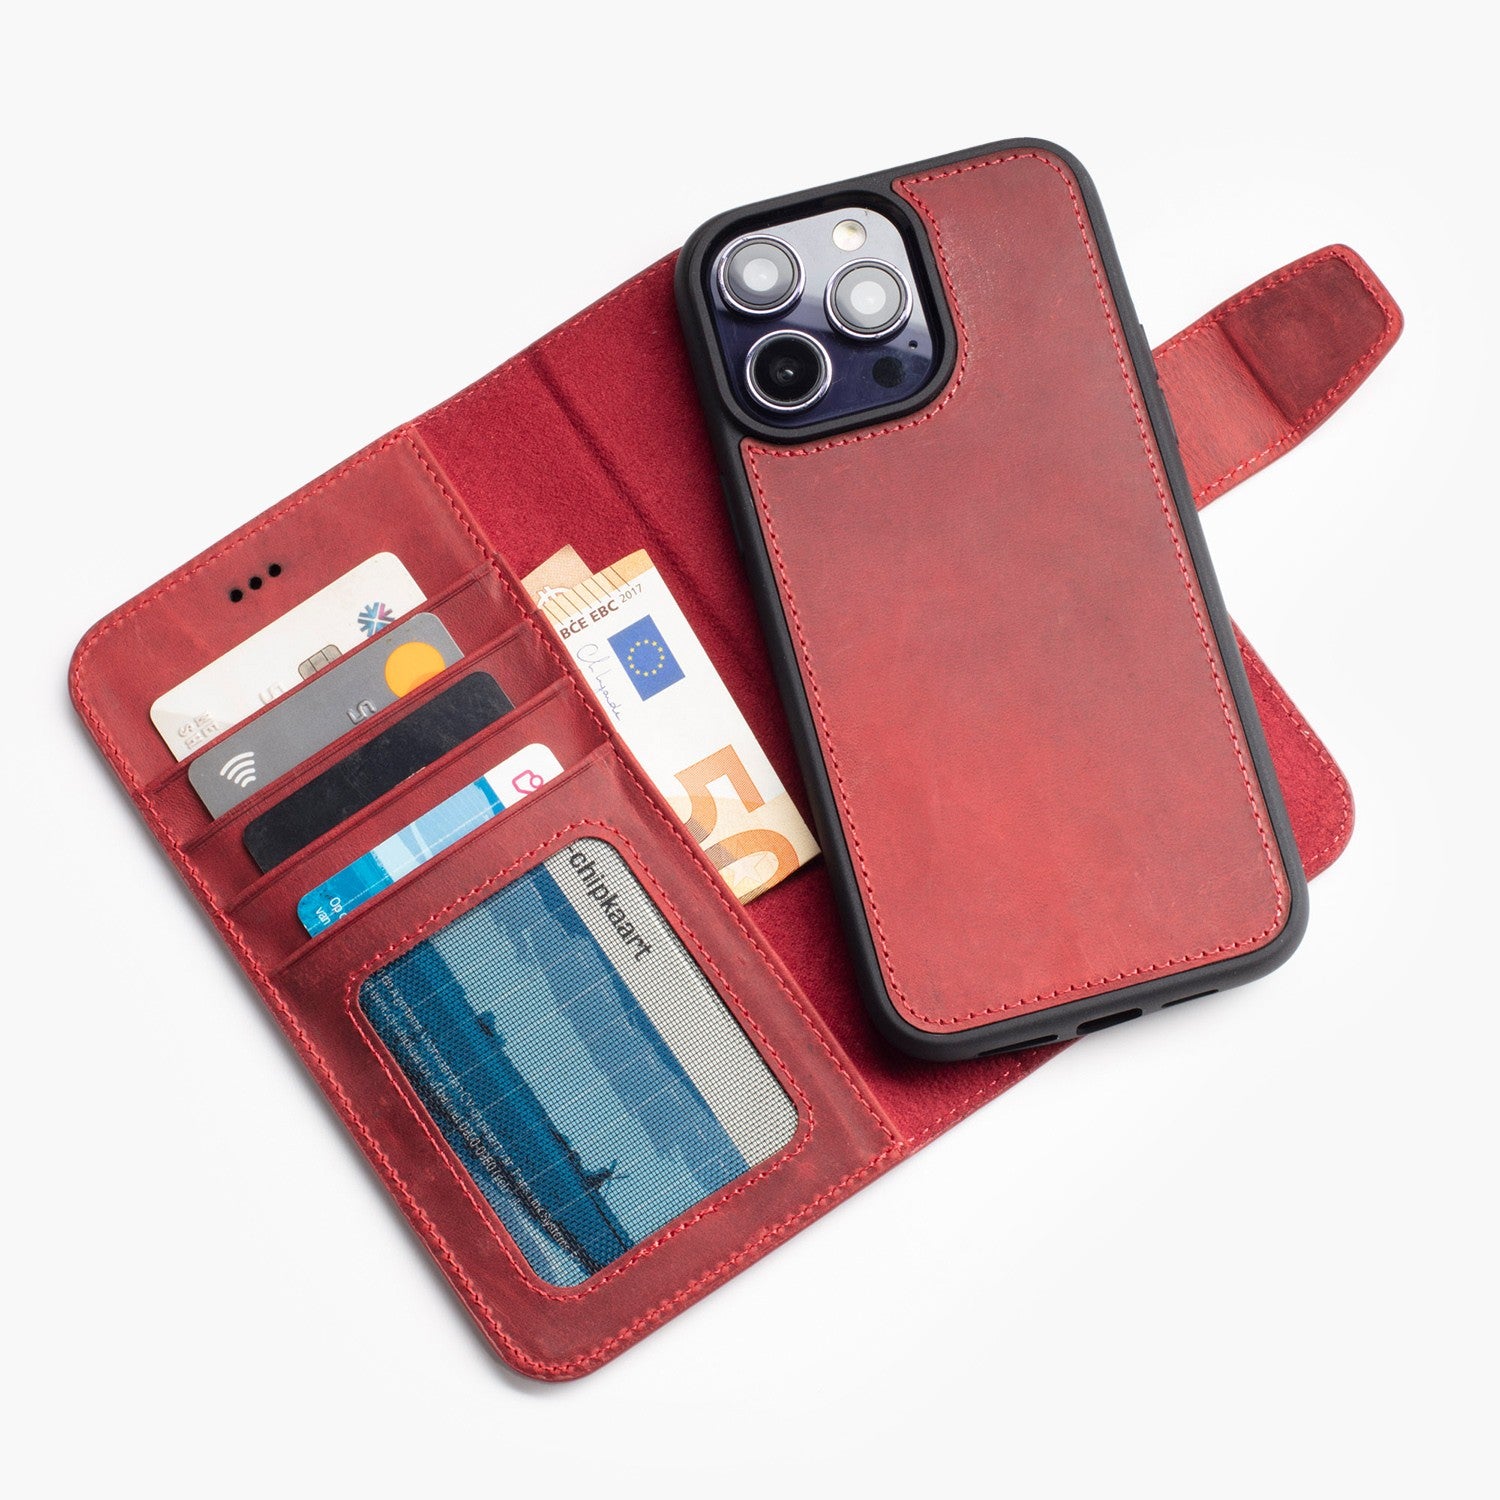 Wachikopa leather Magic Book Case 2 in 1 for iPhone 12 Red